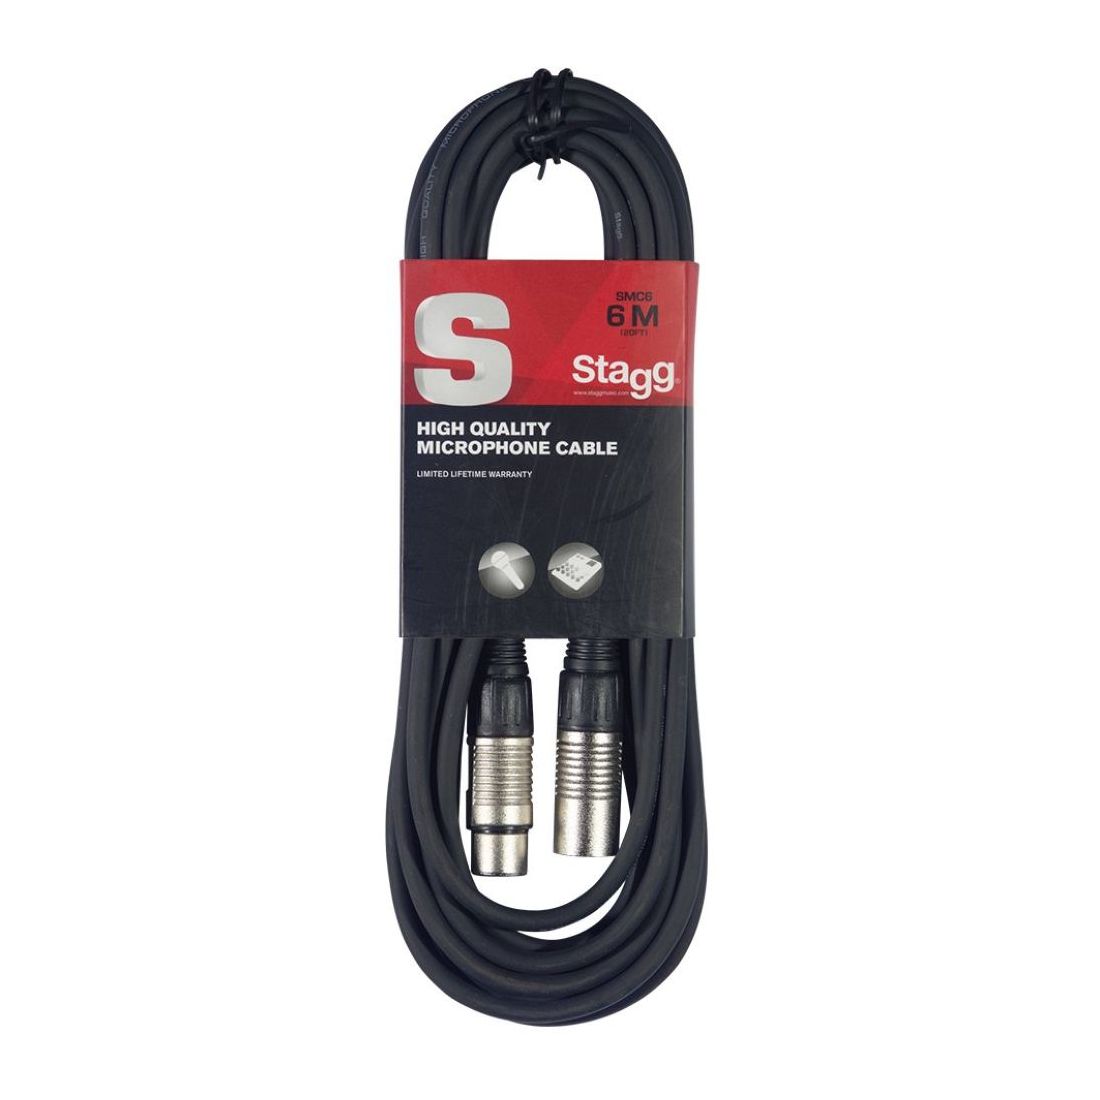 Stagg Smc6 Microphone Cable XLrf XLrm 6M